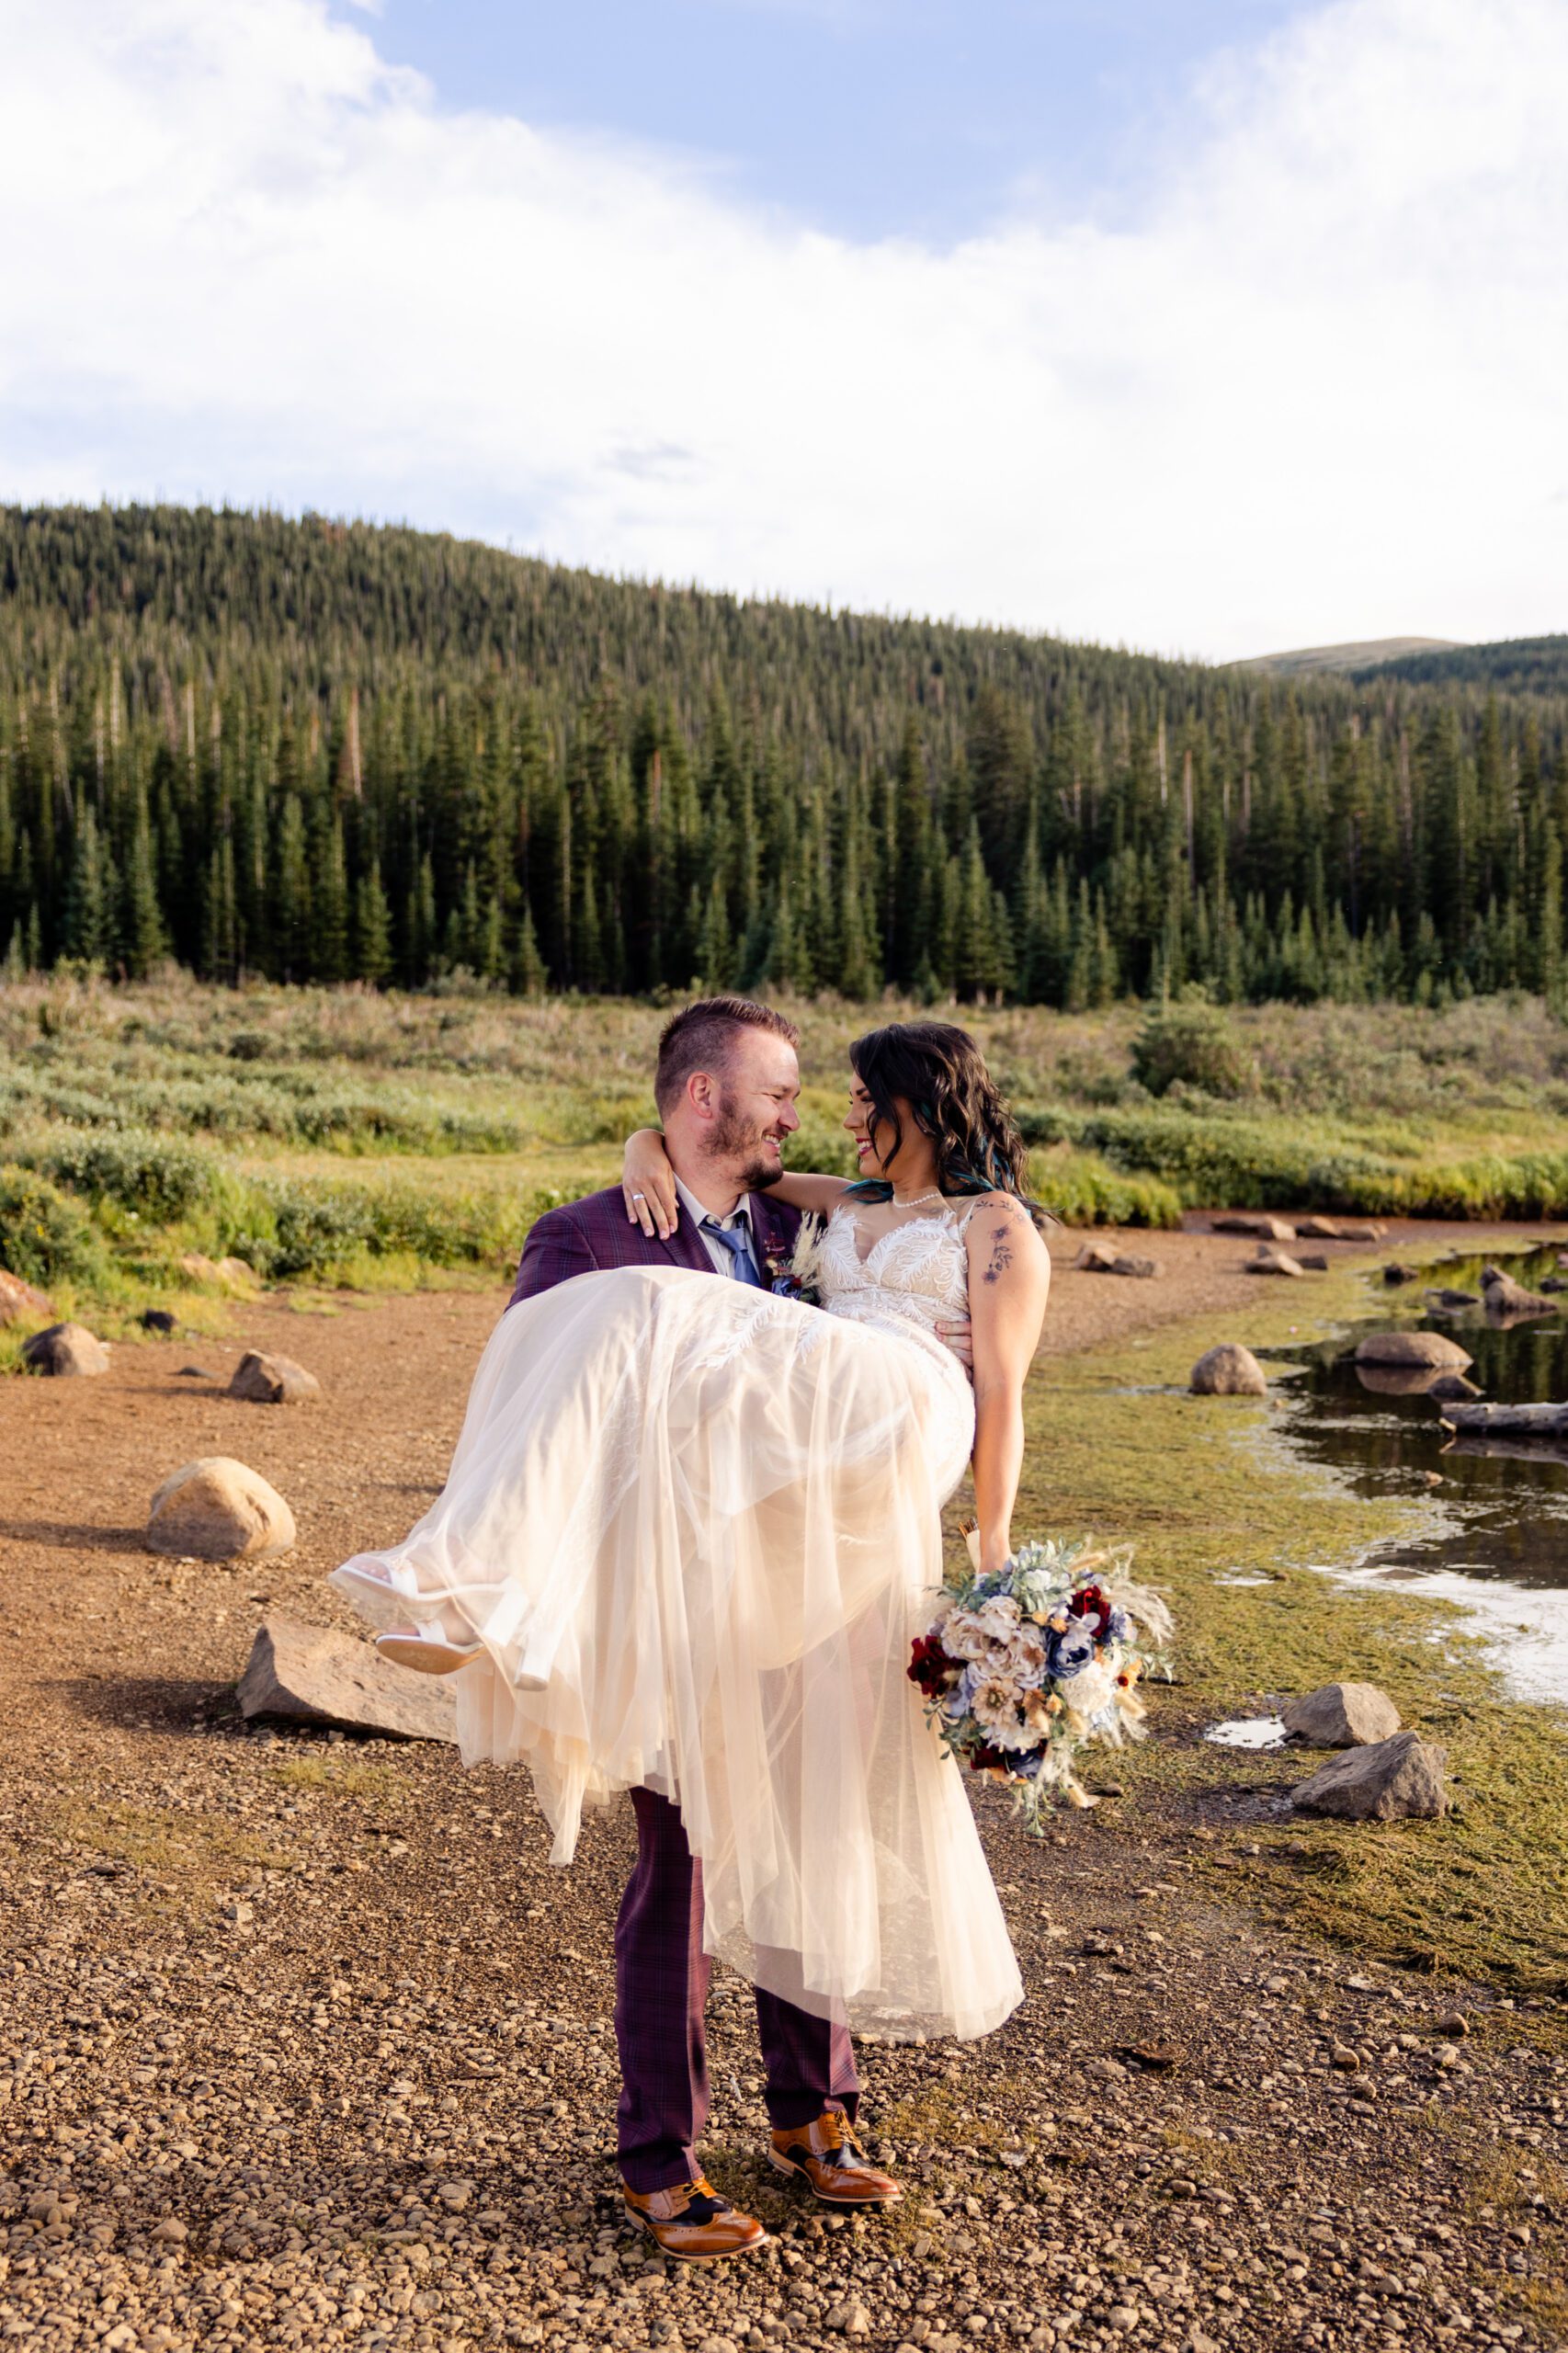 The groom carrying his bride near the lake after their Brainard Lake Elopement.